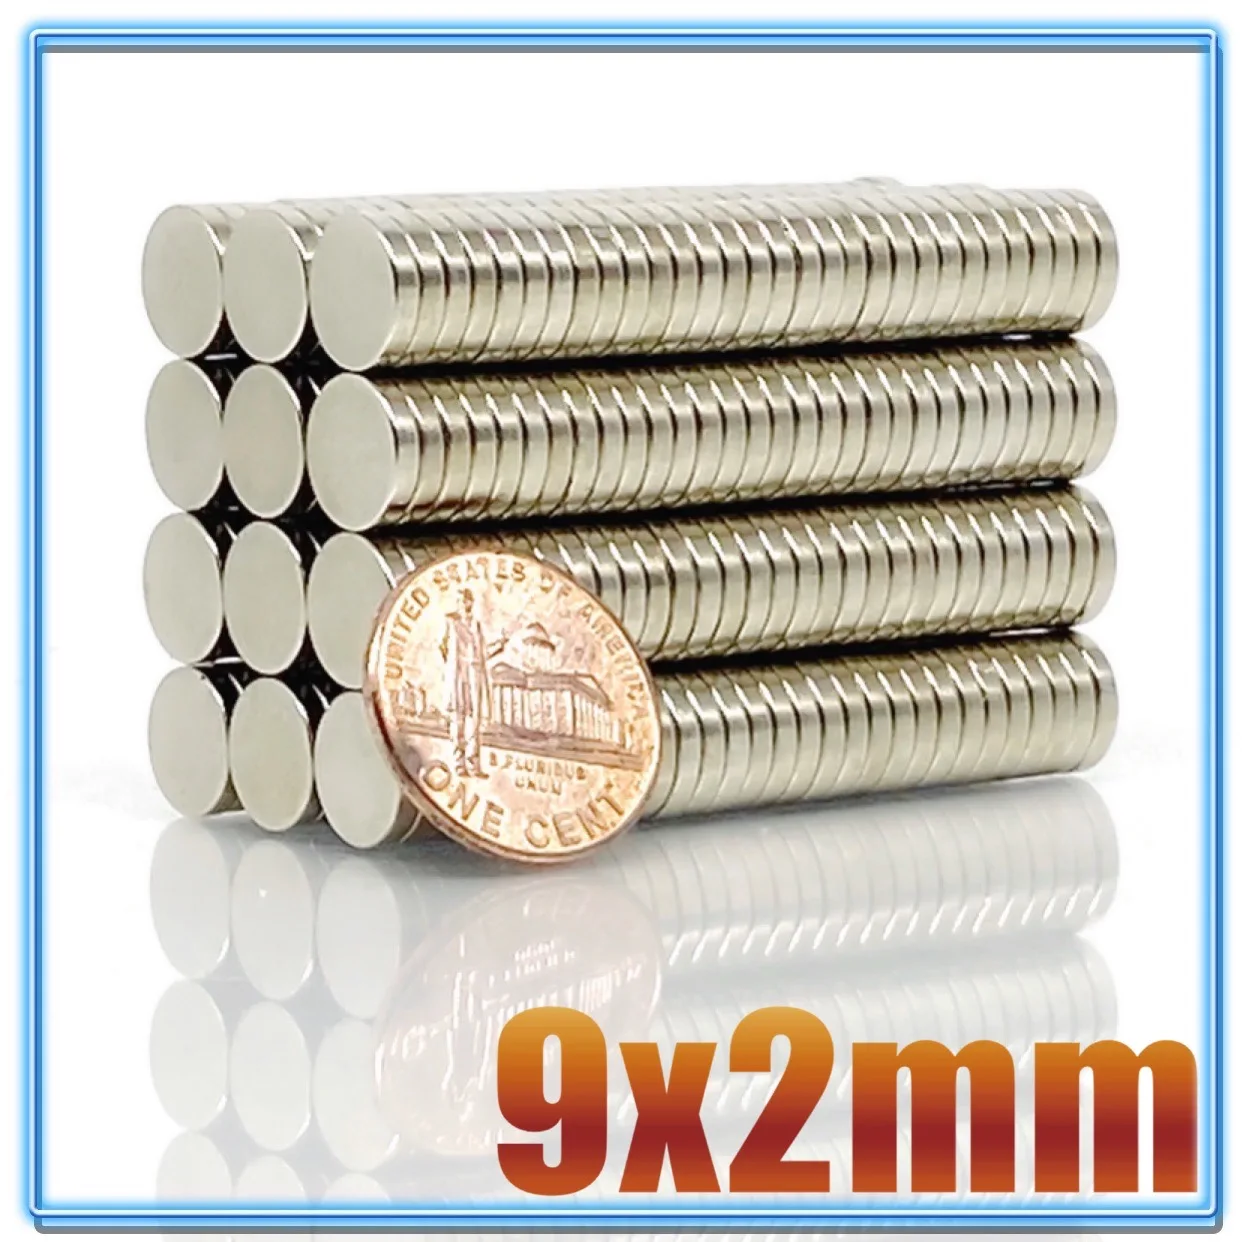 10-1000Pcs 9x2 Neodymium Magnet 9x2mm N35 NdFeB Permanent Small Round Super Powerful Strong Magnetic Magnets Disc 9*2